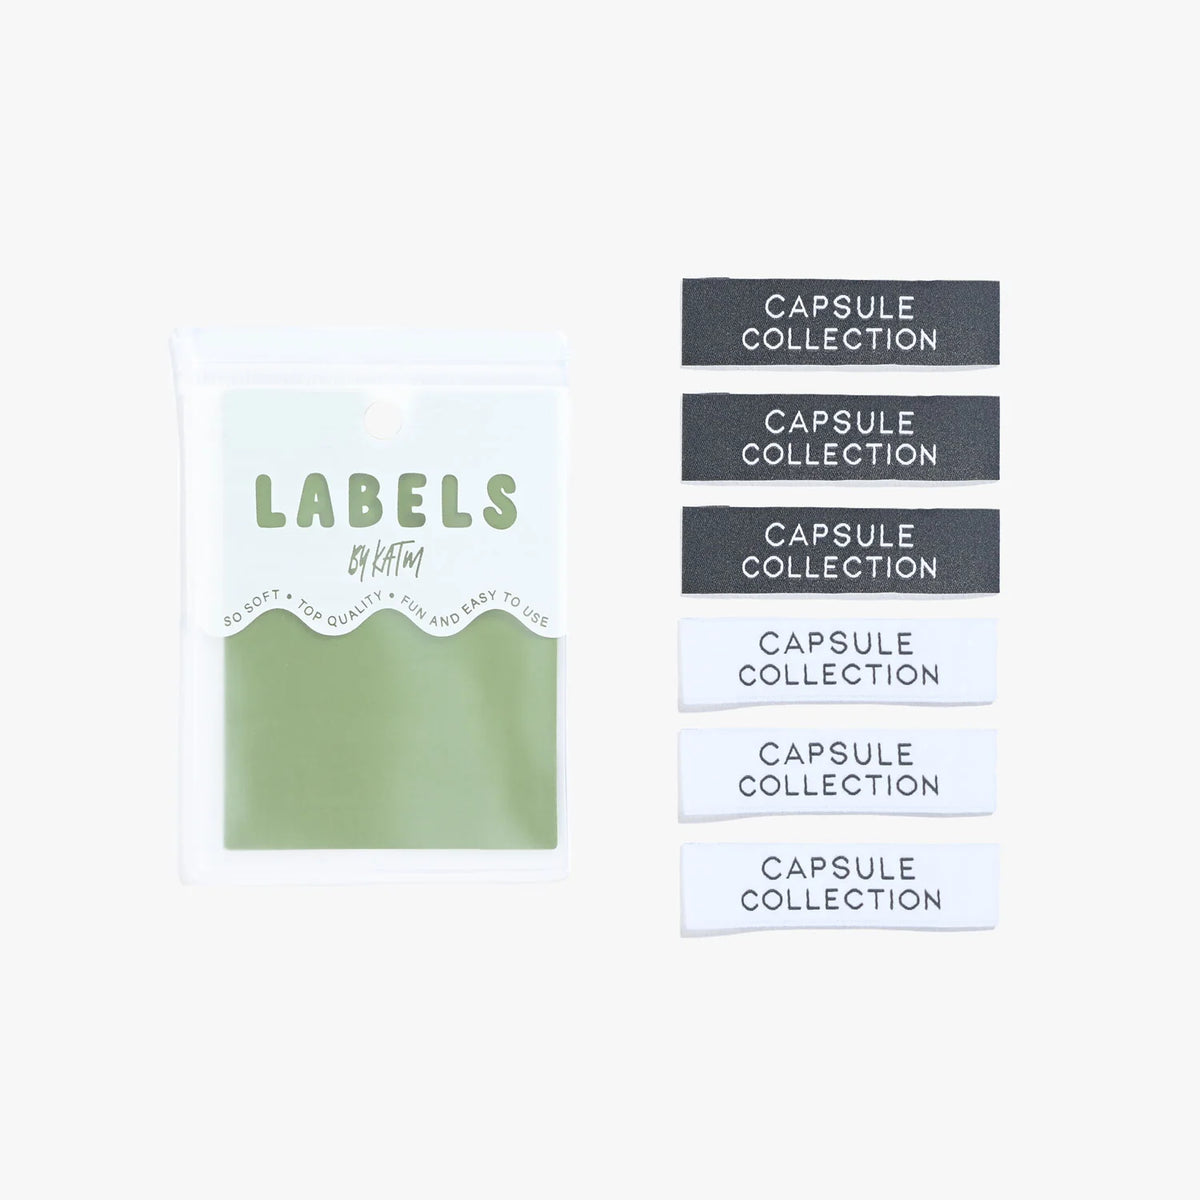 CAPSULE COLLECTION by KATM - Pack of 6 Woven Sew-In Labels